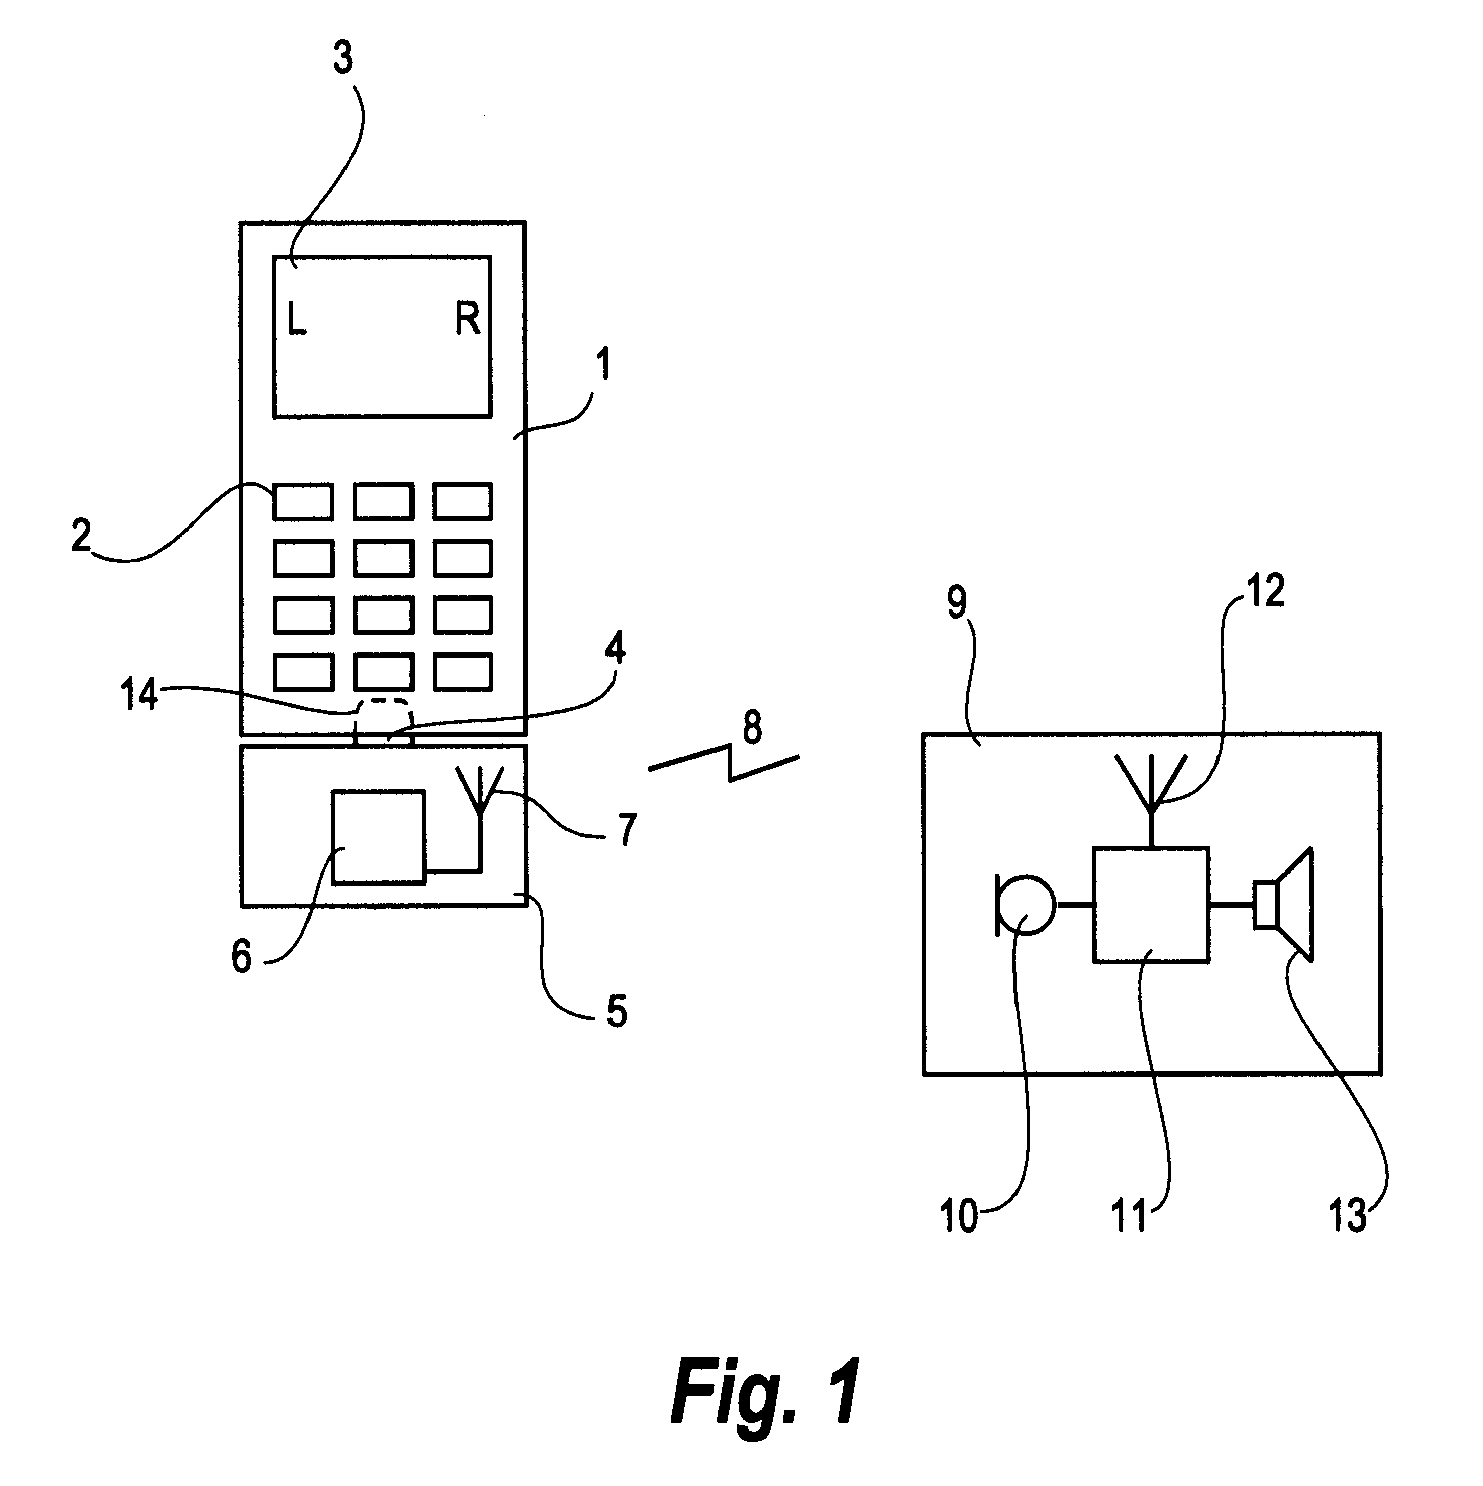 Remote control system for a hearing aid